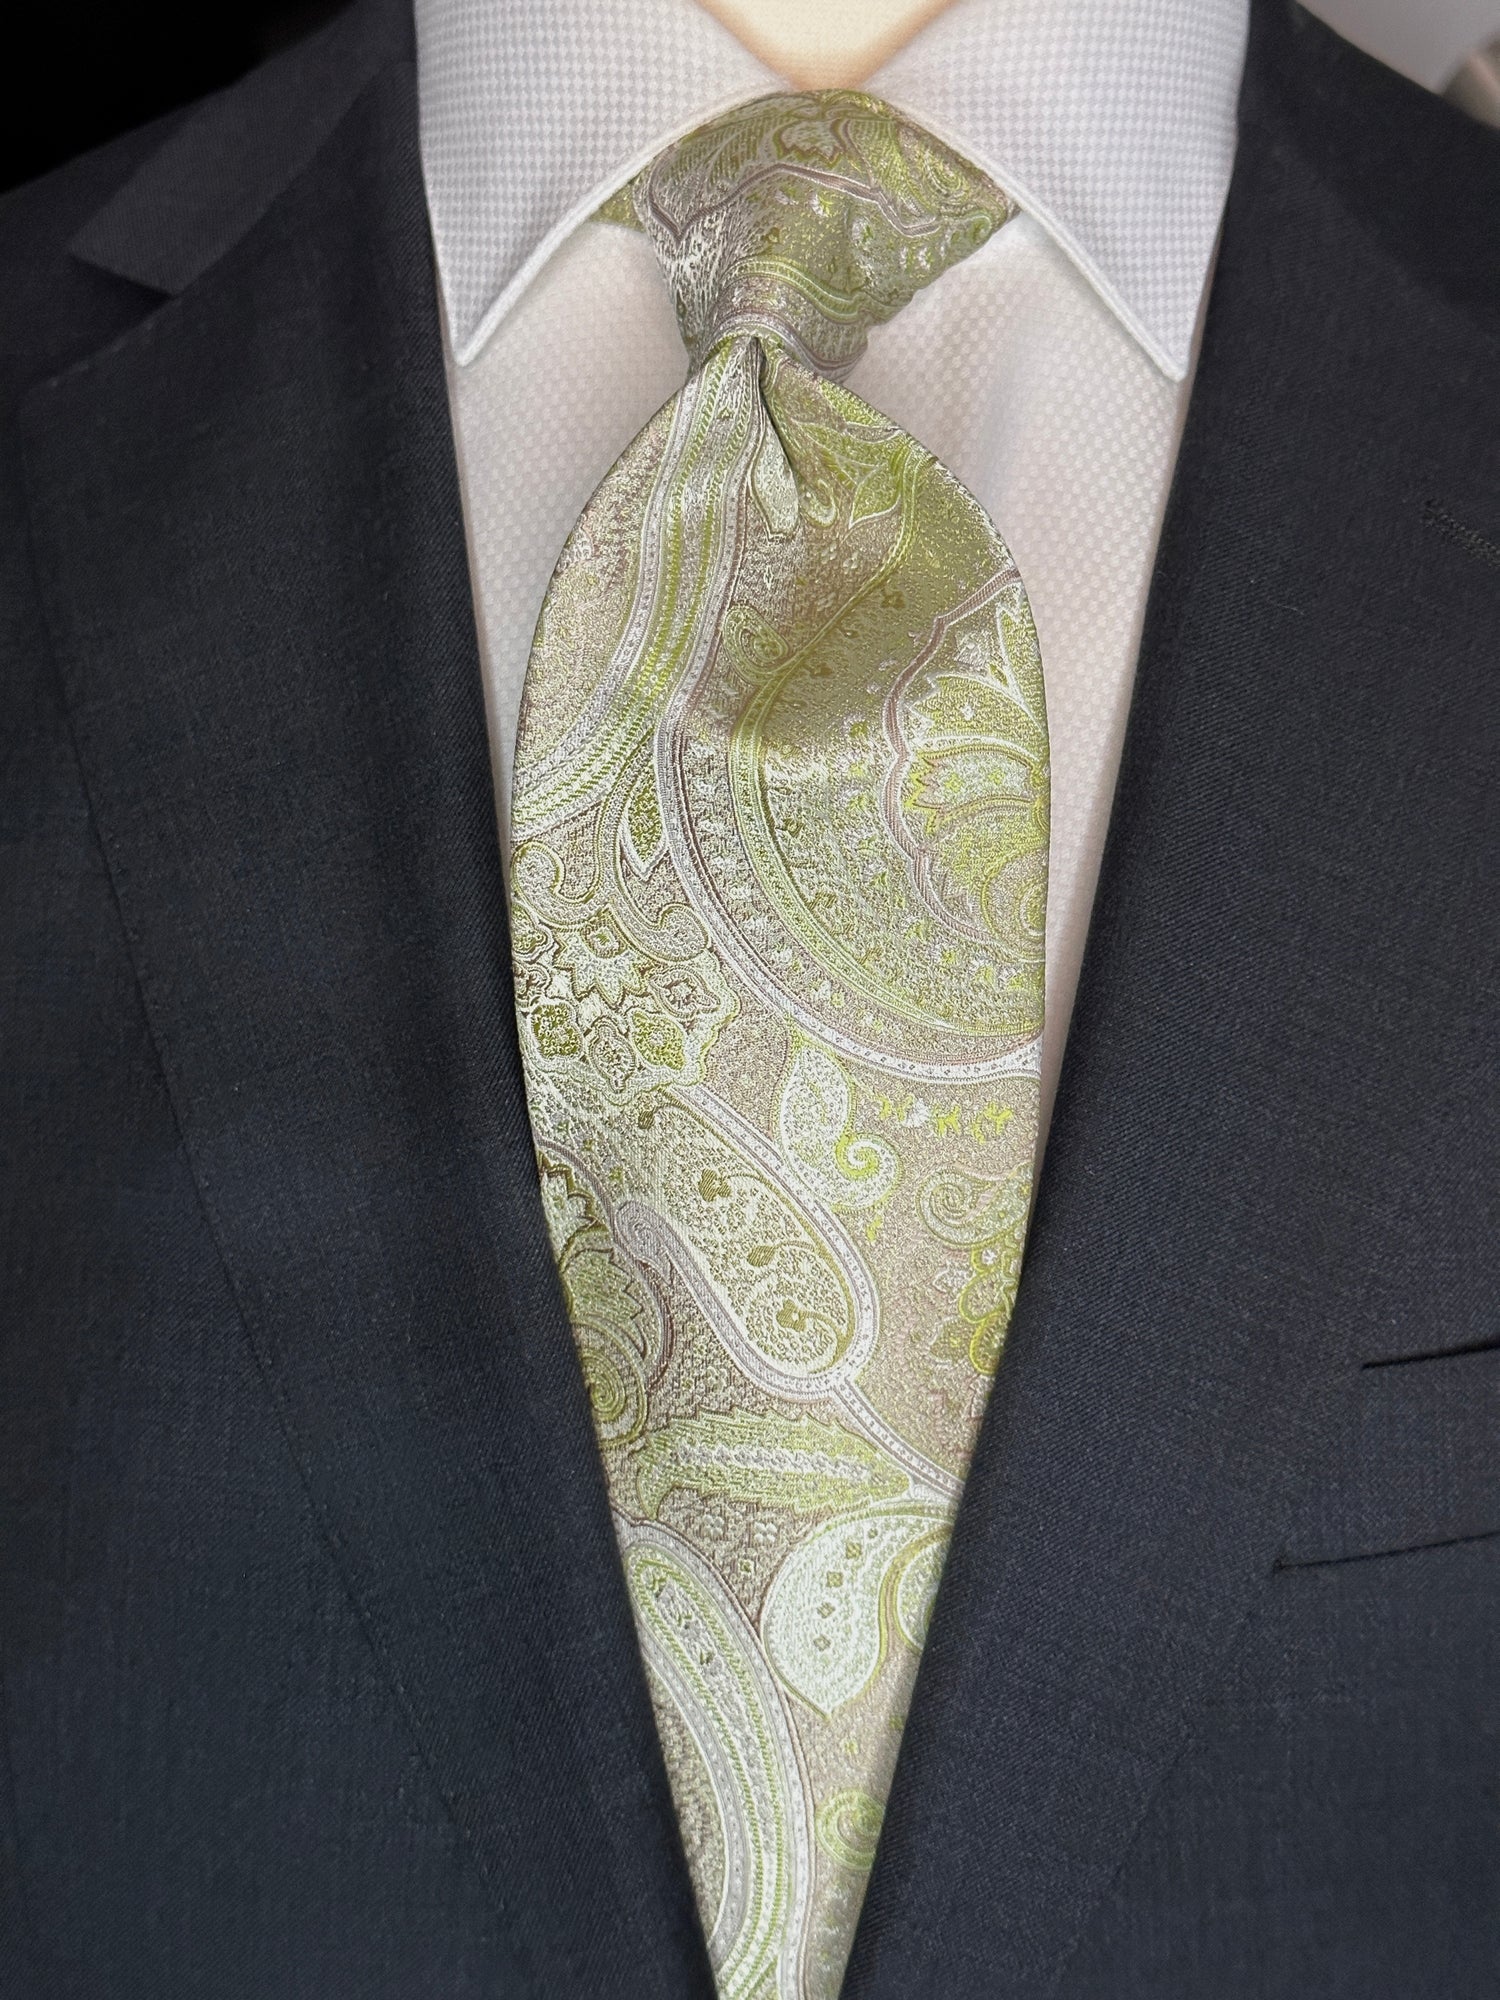 This overall paisley necktie in pure silk, is a stunning example of what a beautifully woven textured necktie can achieve. Regardless of what suit this tie stands out. It has the old European world charm and class that many ties these days lack. This tie is as timeless as possible. It is always in fashion in any season.